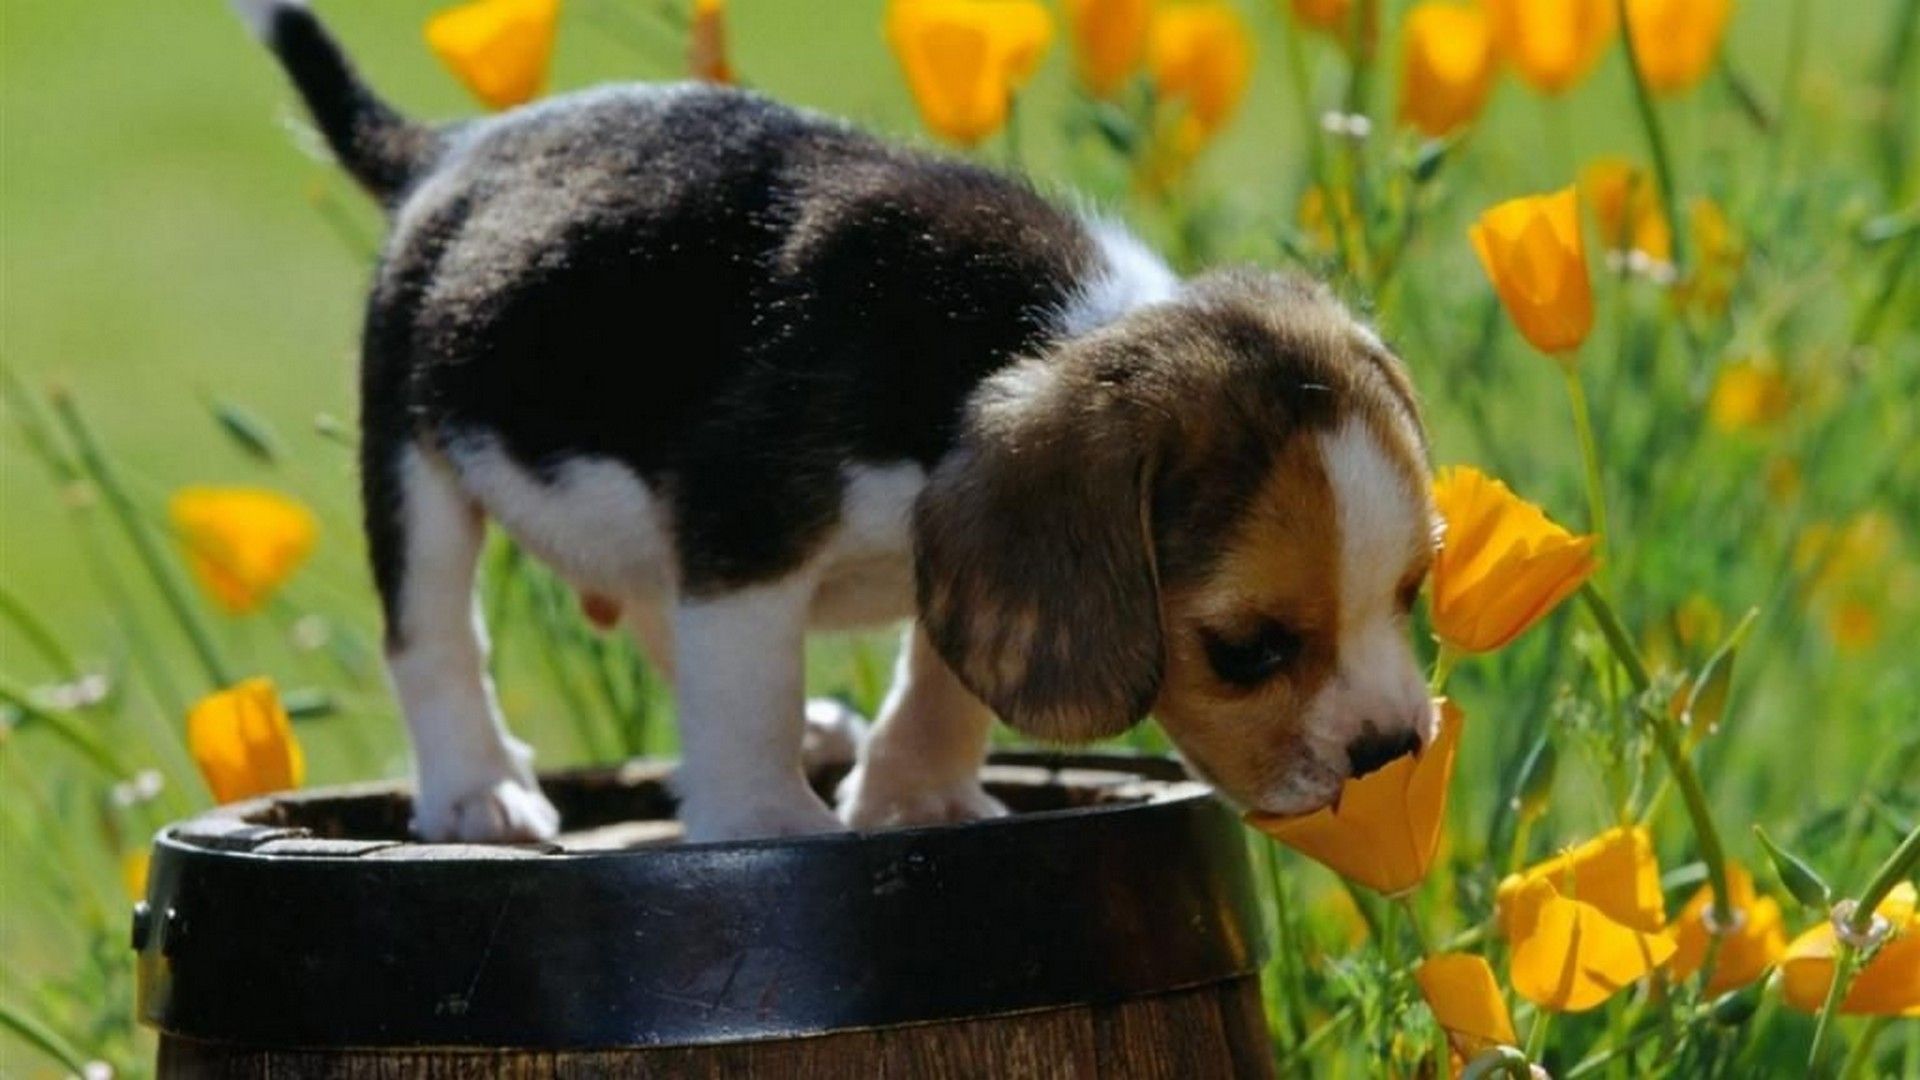 Cute Spring Desktop Background HD. Best HD Wallpaper. Baby animals picture, Cute computer background, Cutest thing ever